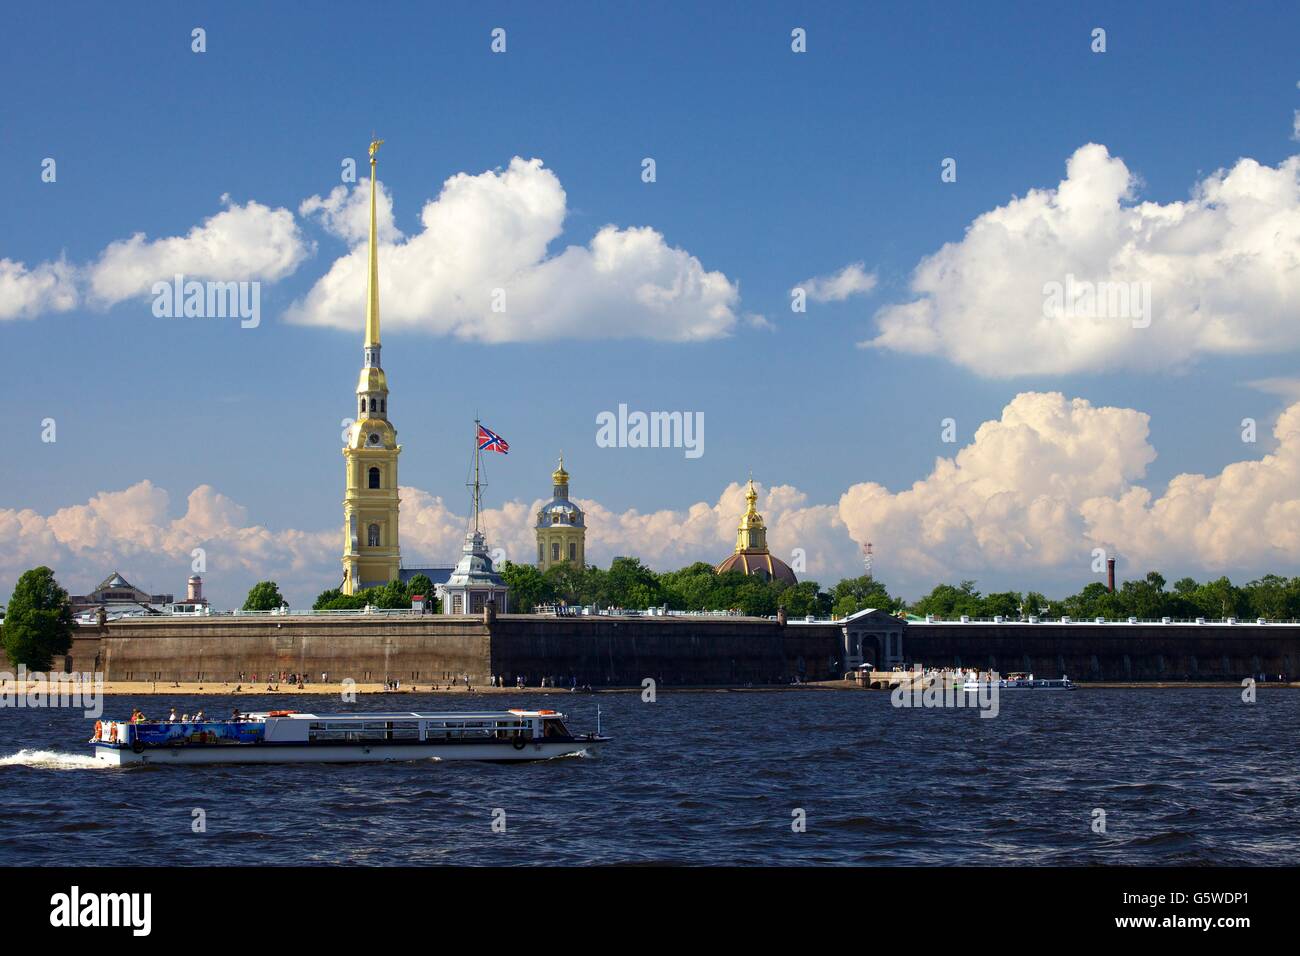 Tourist boat on the Neva River in front of Peter and Paul Fortress and Saint Peter and Saint Paul Cathedral, Saint Petersburg Stock Photo